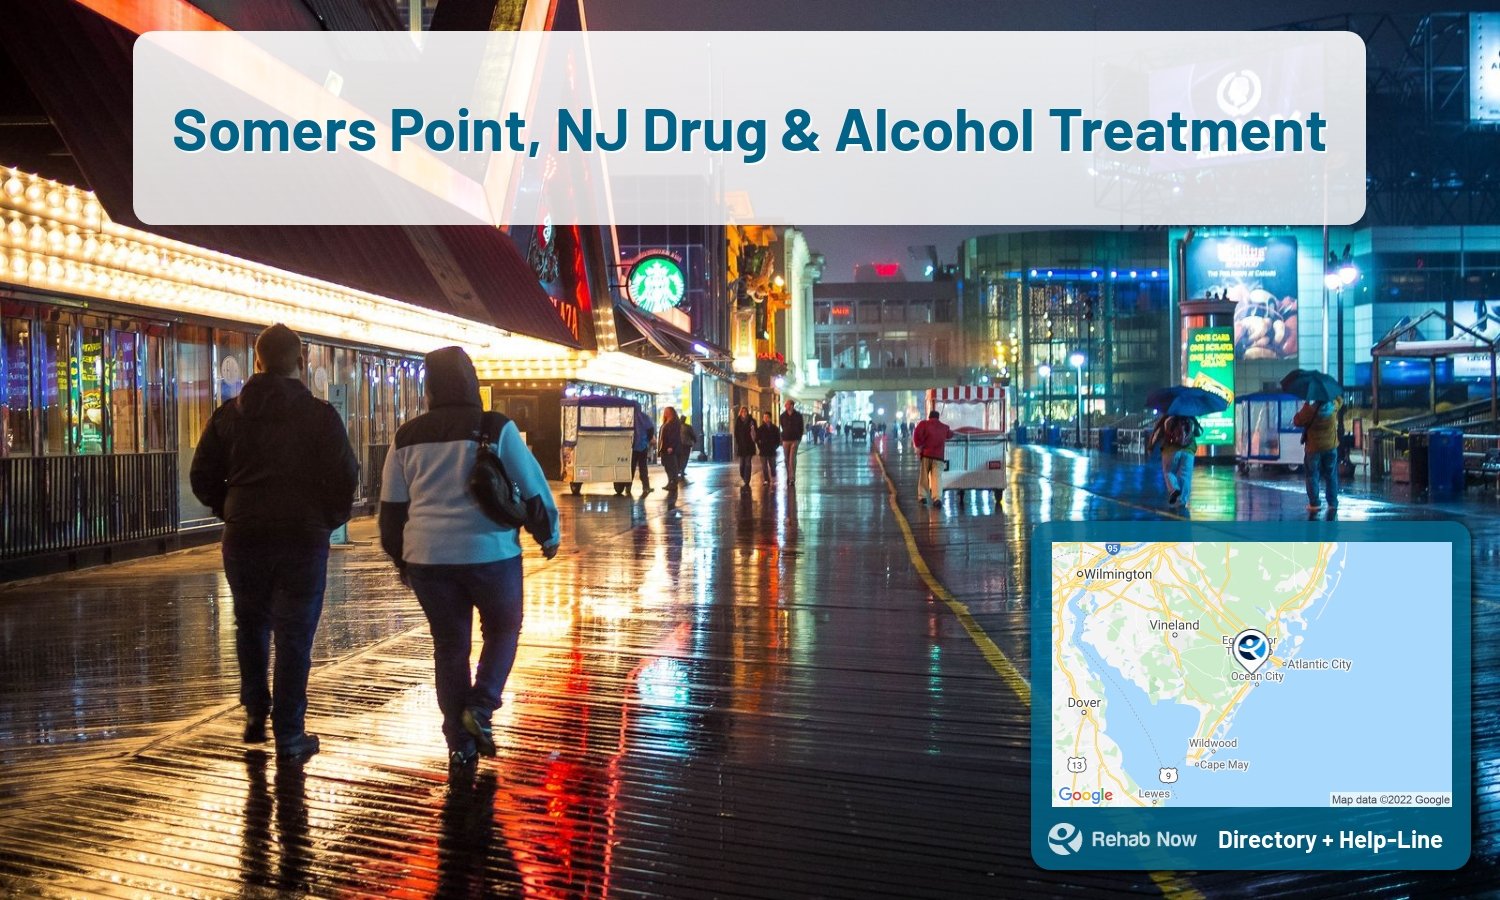 View options, availability, treatment methods, and more, for drug rehab and alcohol treatment in Somers Point, New Jersey